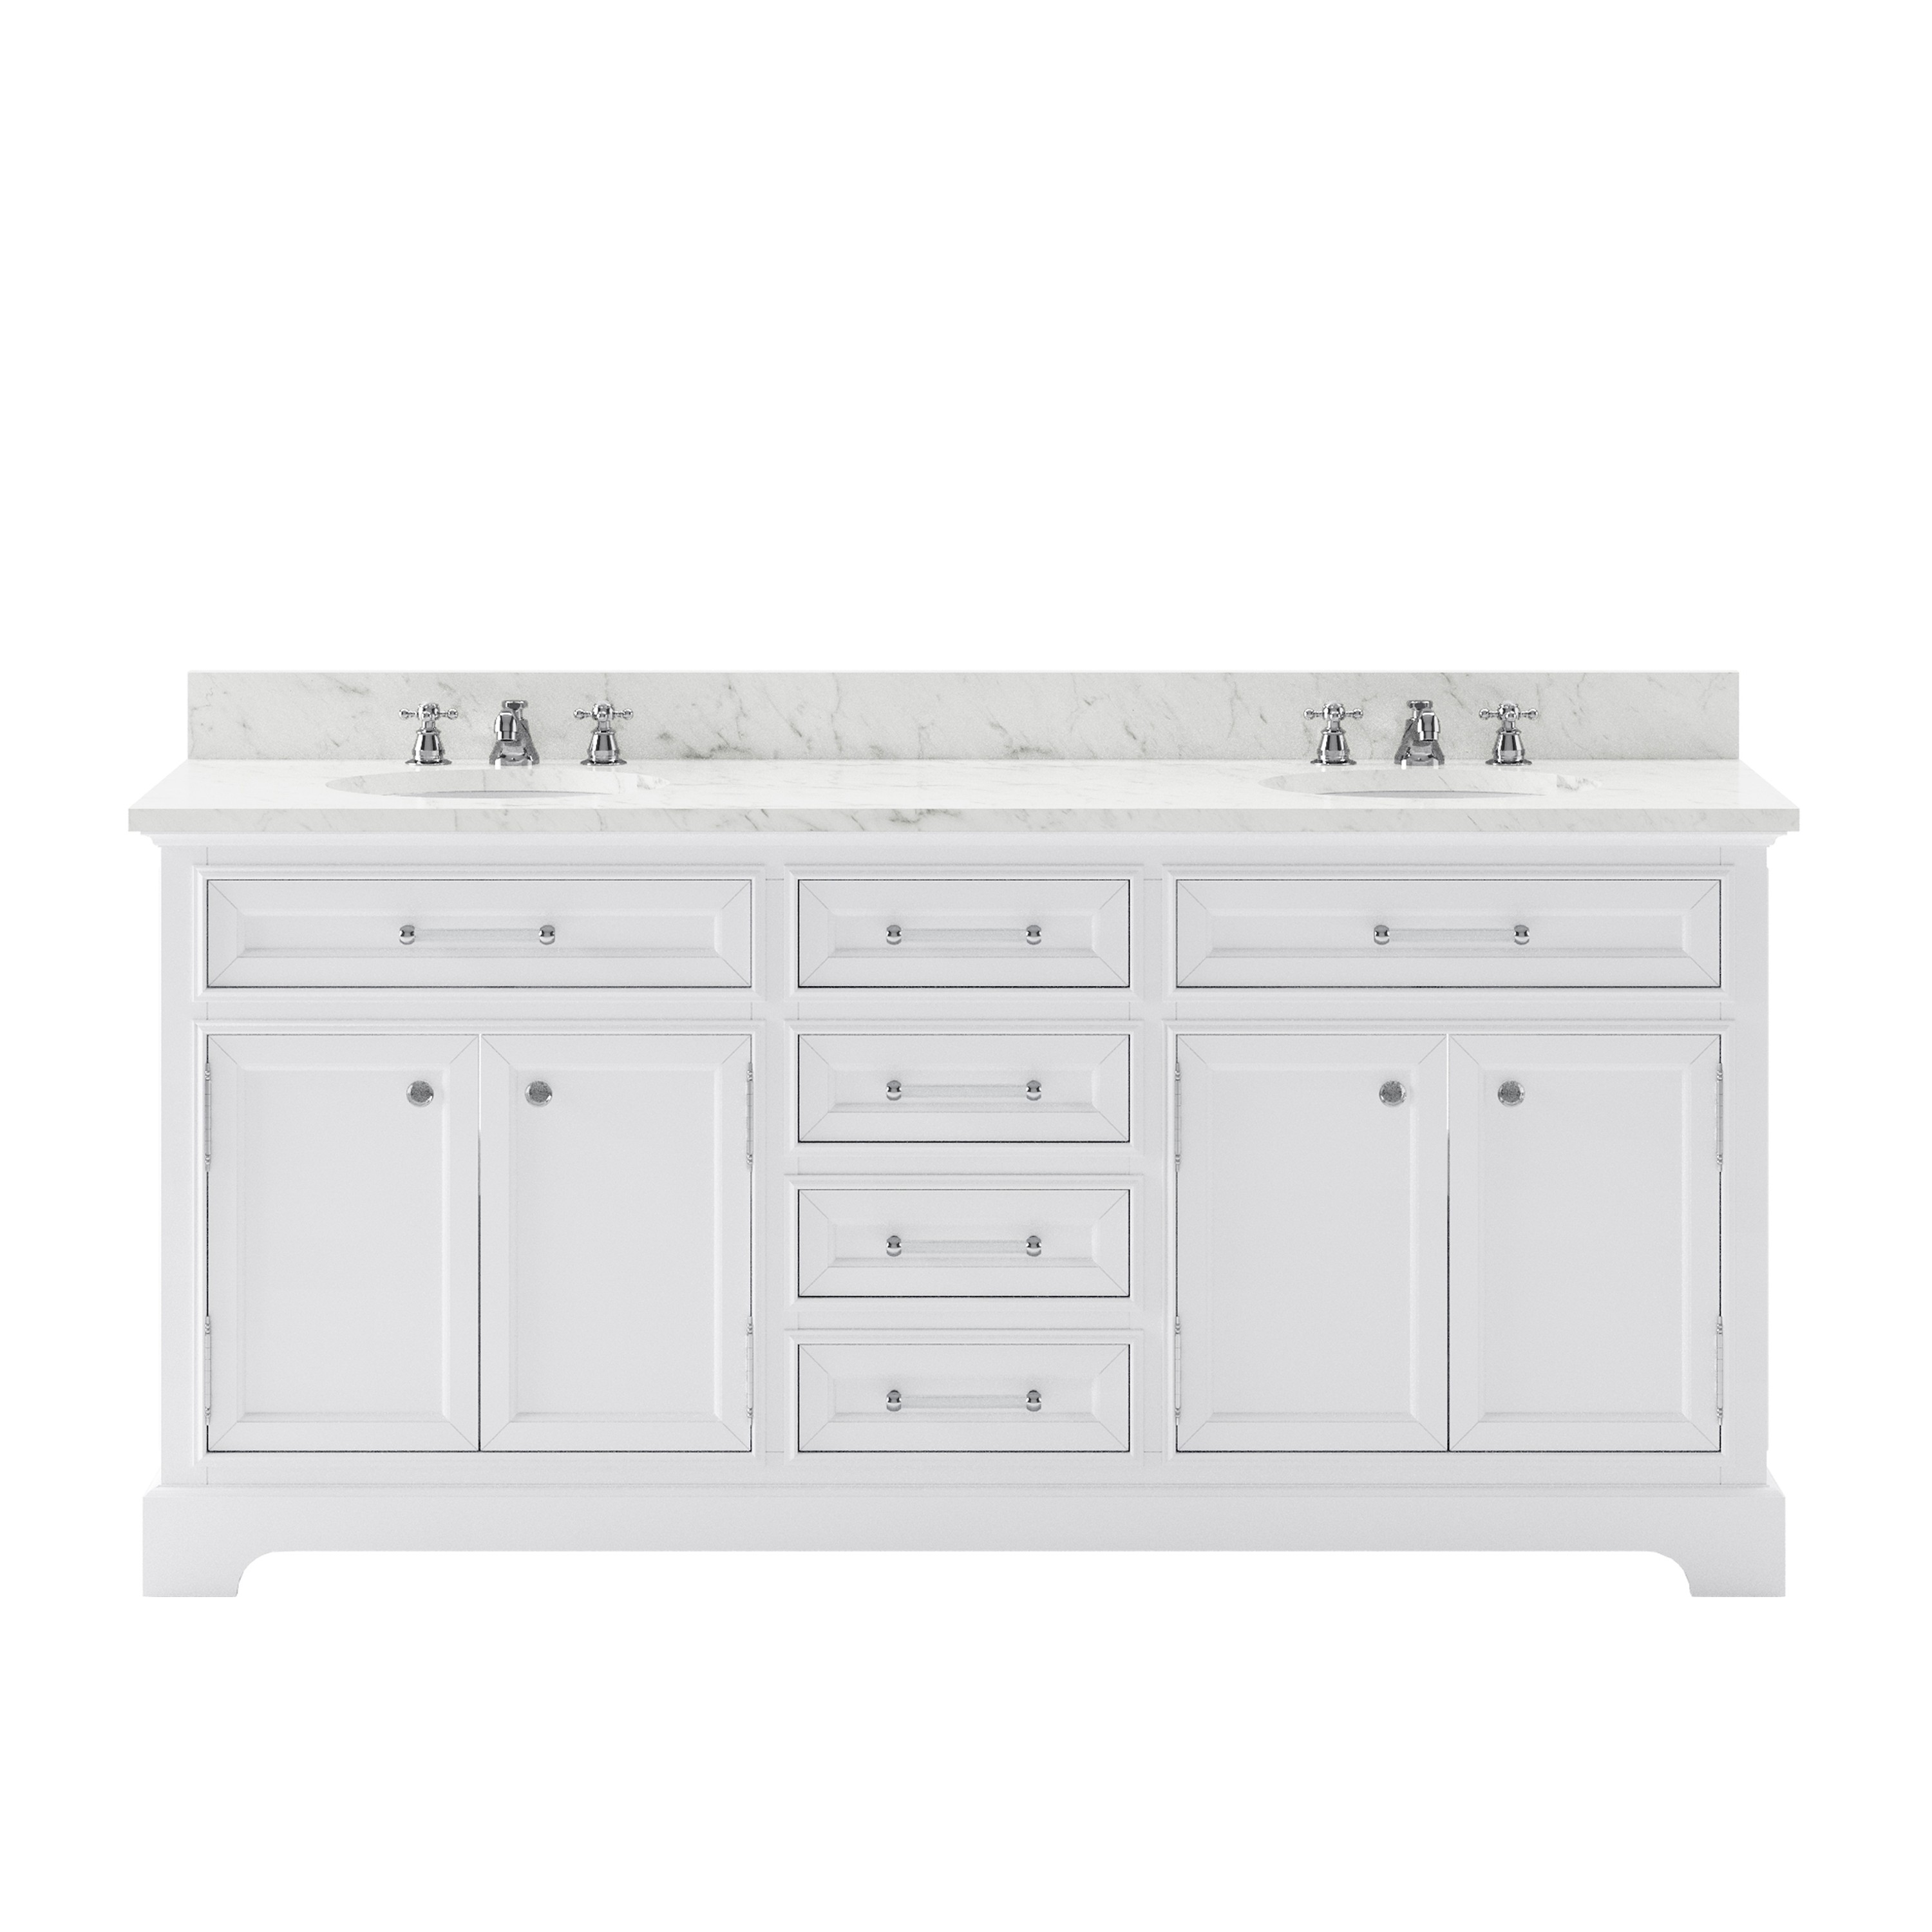 WATER-CREATION DE72CW01PW-000BX0901 DERBY 72 INCH PURE WHITE DOUBLE SINK BATHROOM VANITY WITH FAUCET